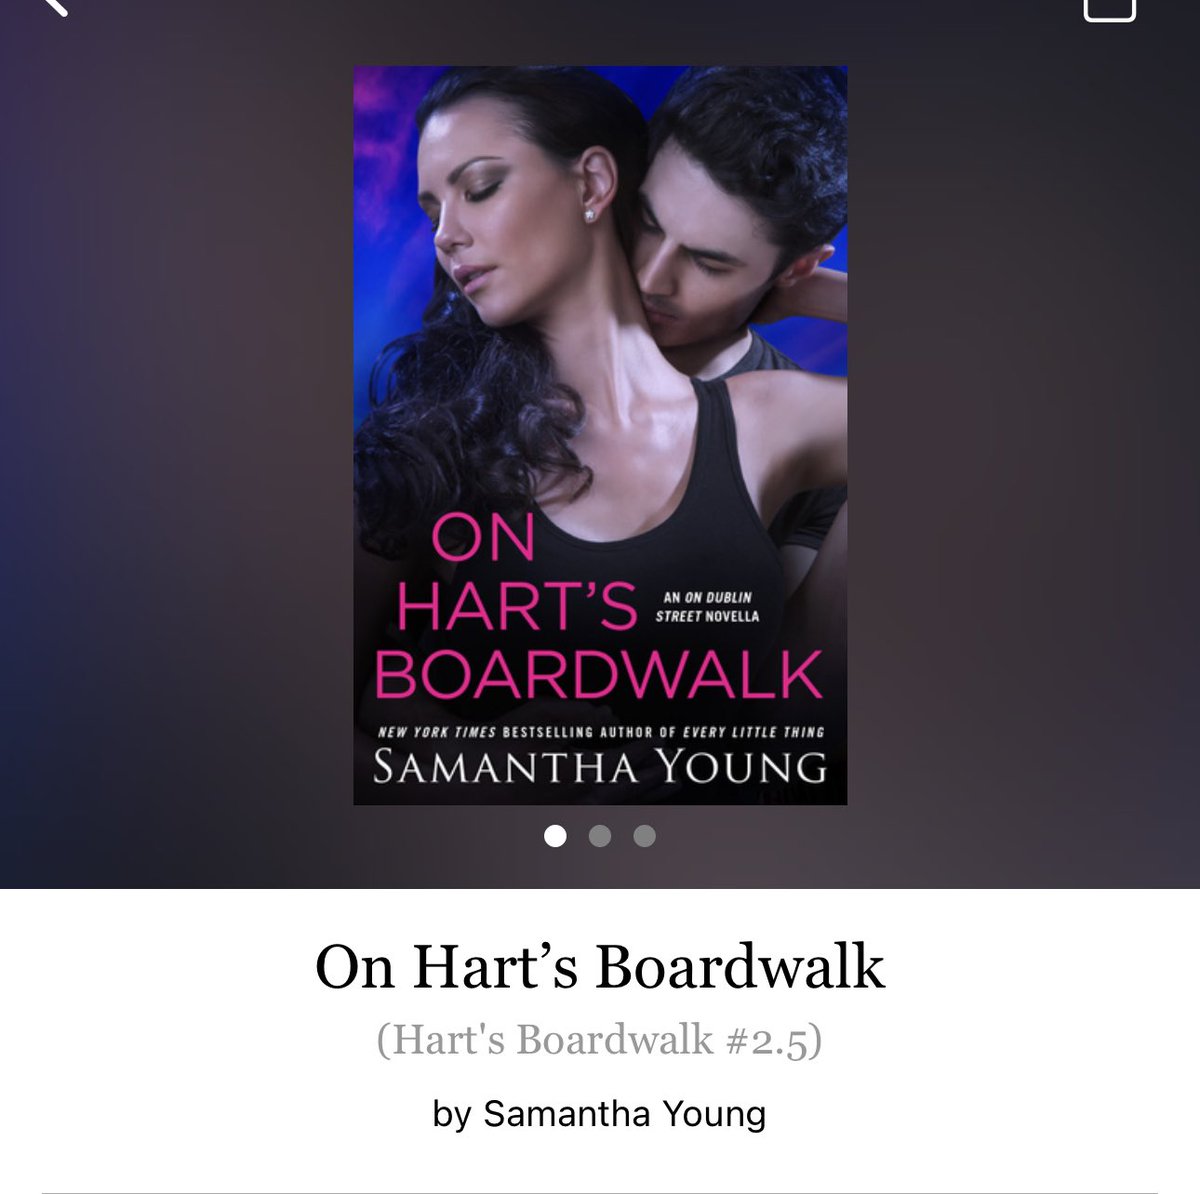 On Hart's Boardwalk by Samantha Young 

#OnHartsBoardwalk by #SamanthaYoung #5439 #11chapters #128pages #september2023 #982of400 #Series #Audiobook #76for19 #Hartsboardwalkseries #Book2.5of4 #Novella #NateAndLiv #clearingoffreadingshelves #whatsnext #readitquick